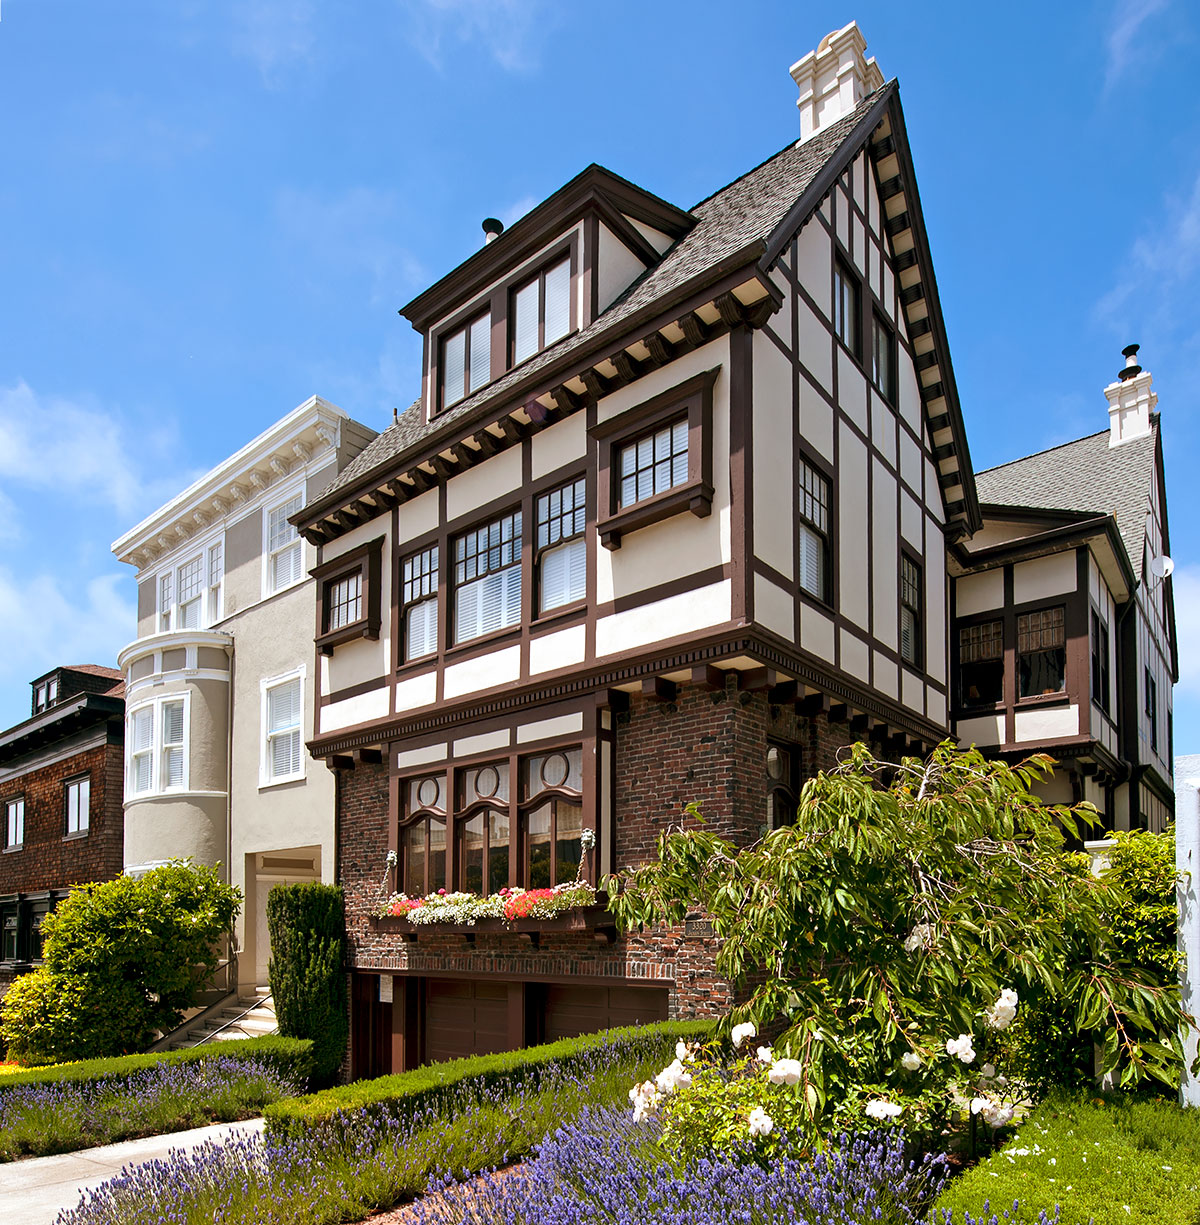 3320 Jackson Street in Pacific Heights, designed by Conrad Meussdorffer, built 1906